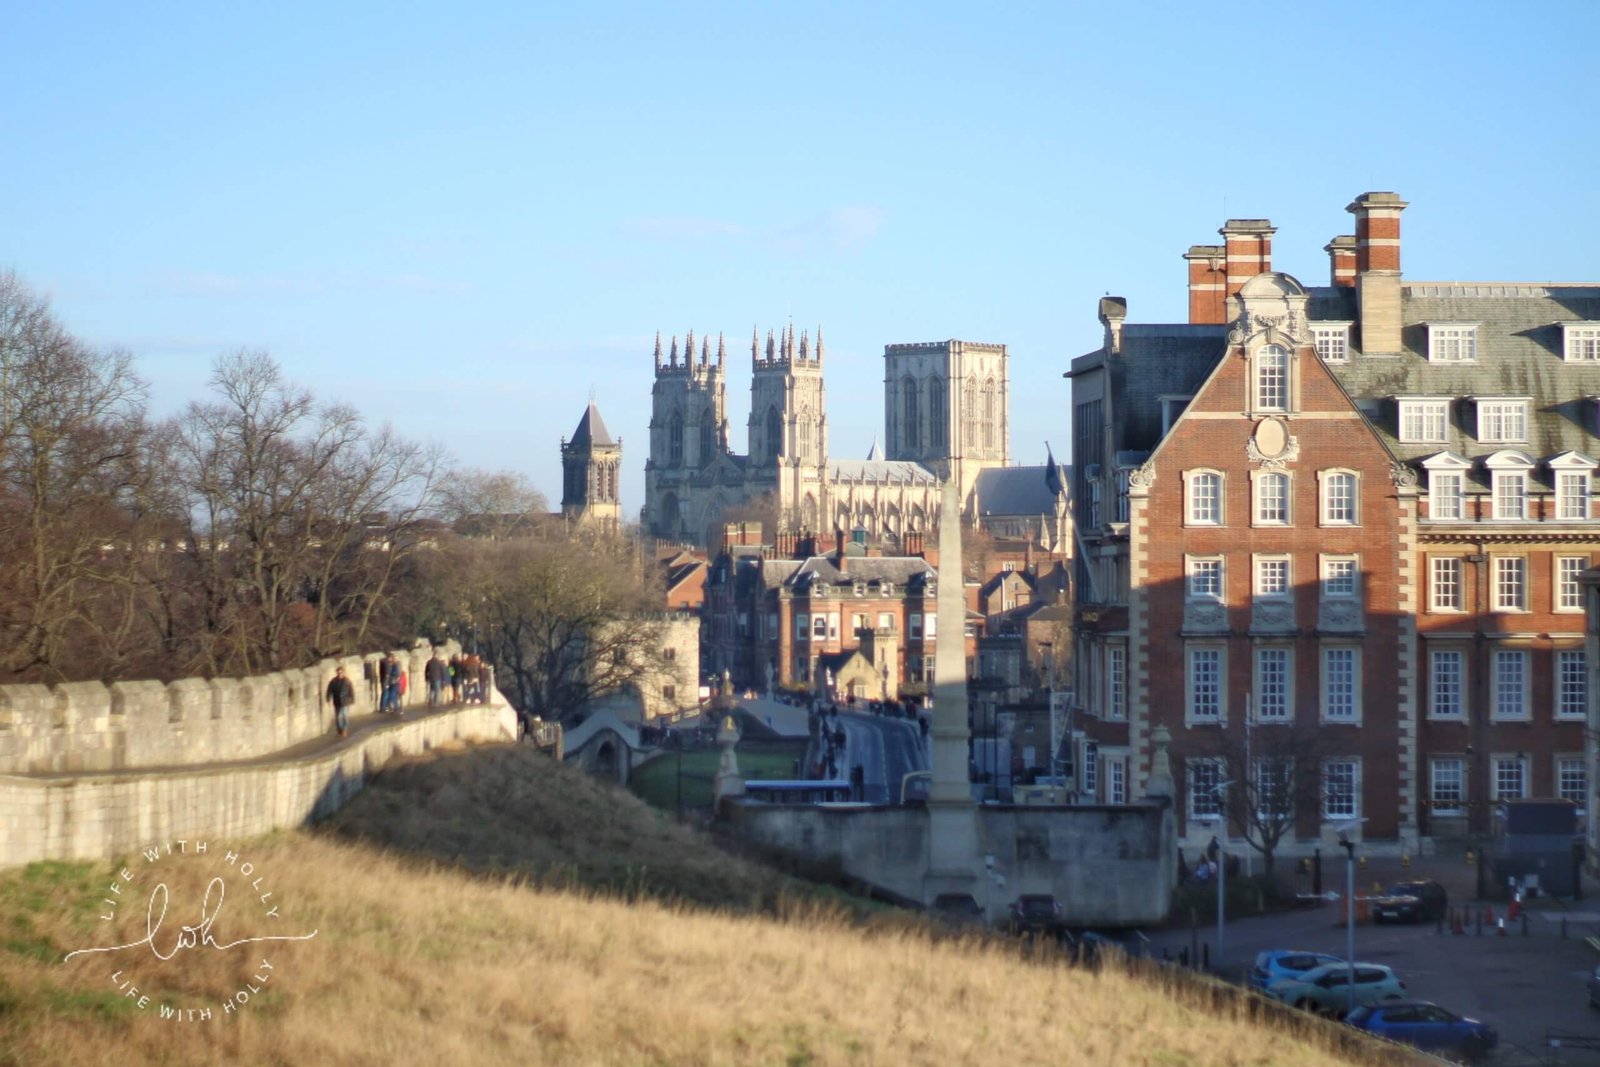 York City Walls - Weekend-Wander-York-City-Centre-and-Walls-by-Life-with-Holly-8